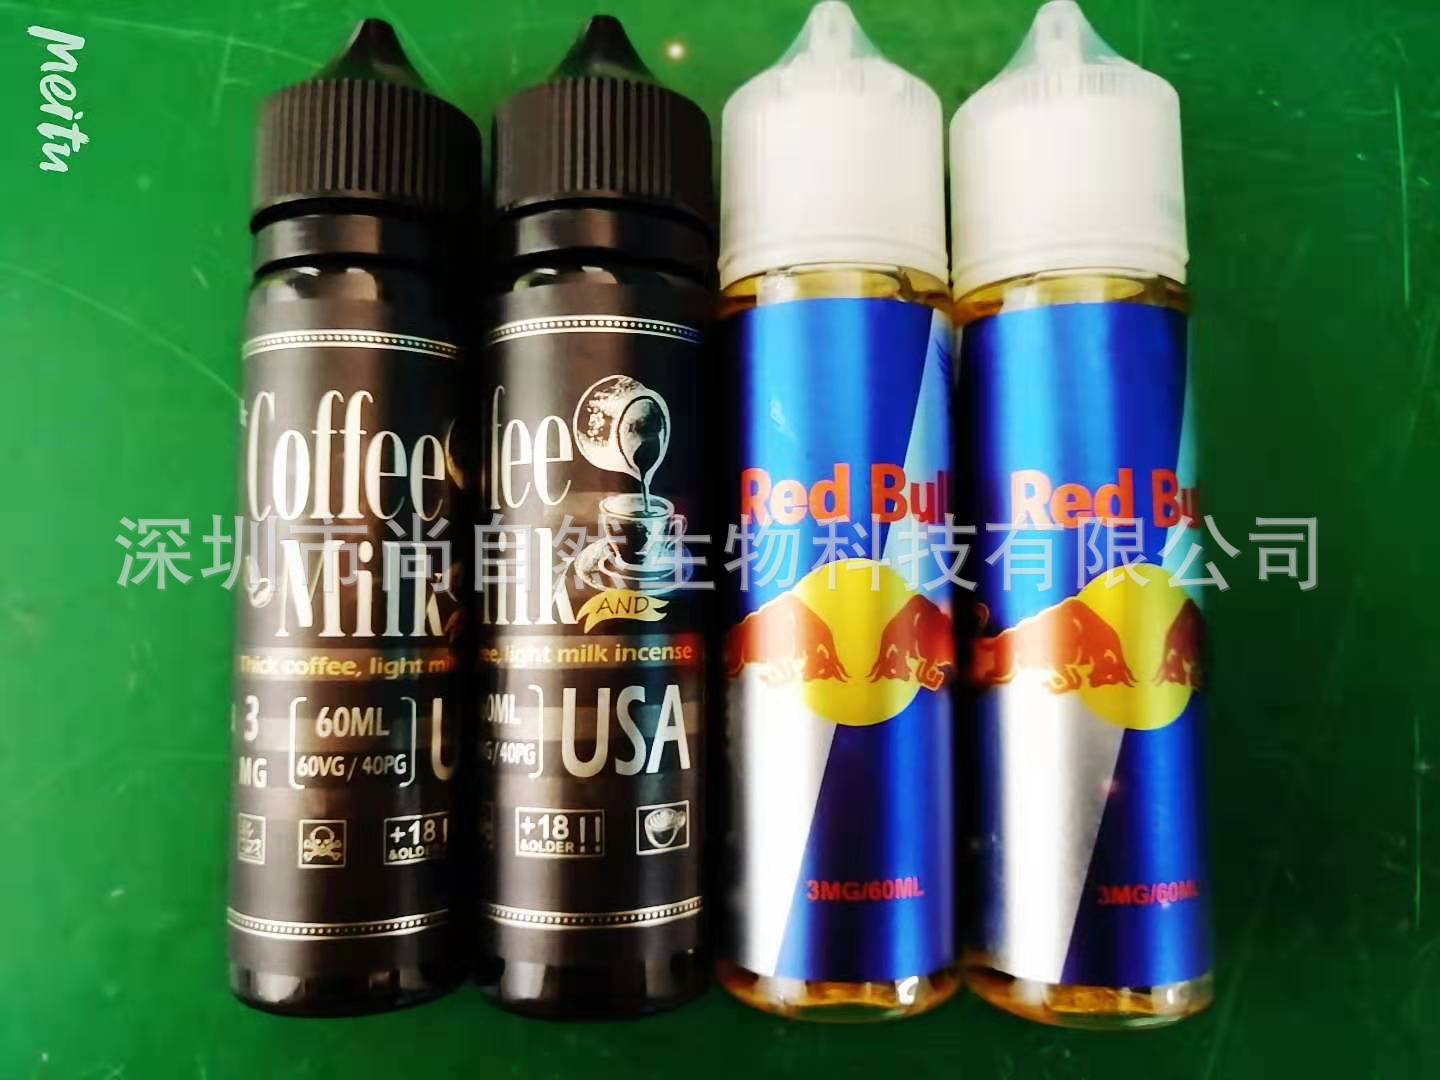 Original quality goods U.S.A Vanilla Coffee Red Bull Electronic cigarette oil 60ML goods in stock